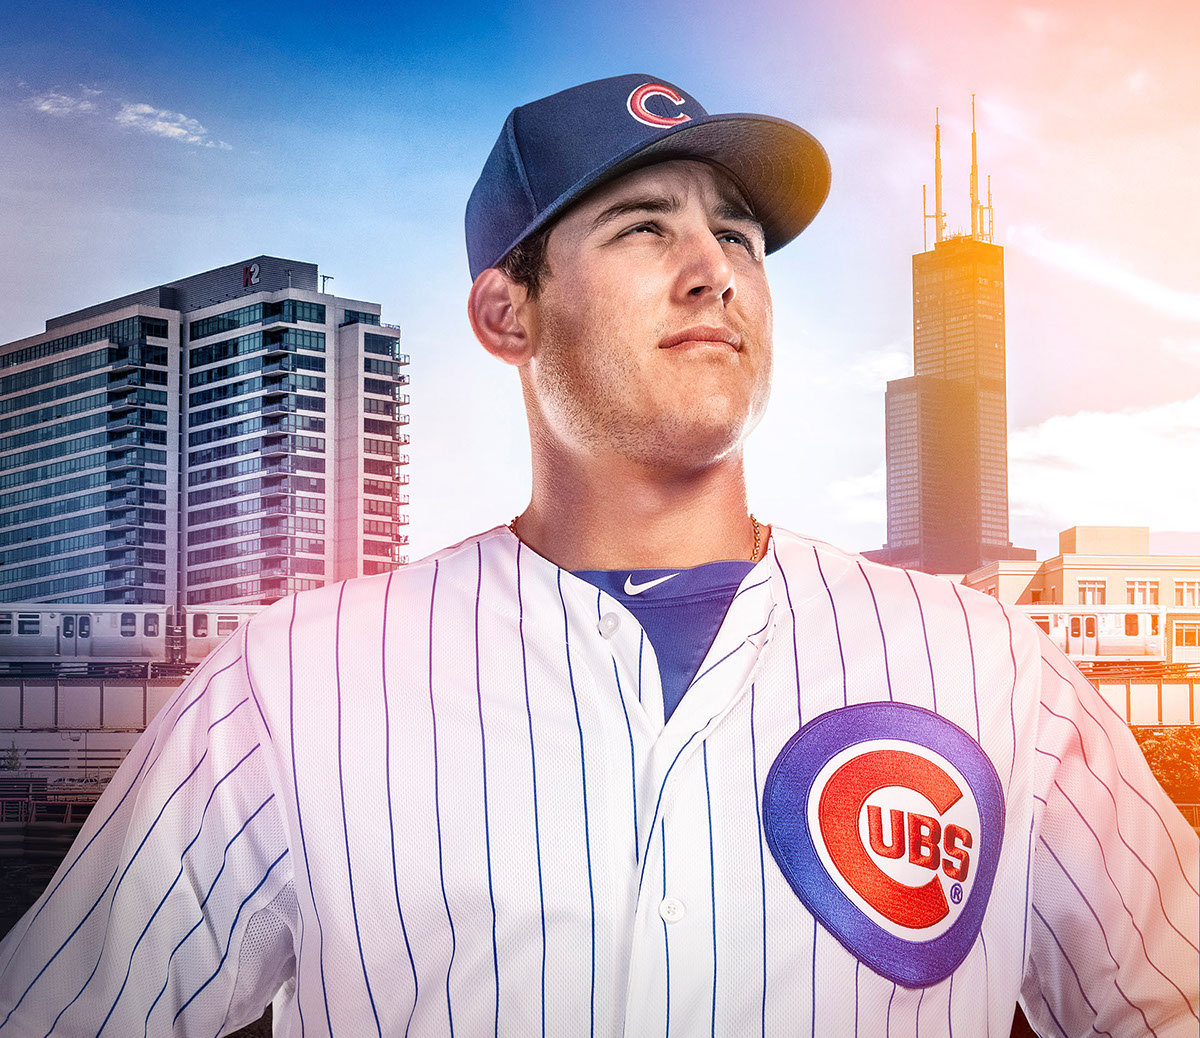 Chicago Cubs world series Blair Bunting Advertising Photographer behind the scenes sports portrait Celebrity athlete